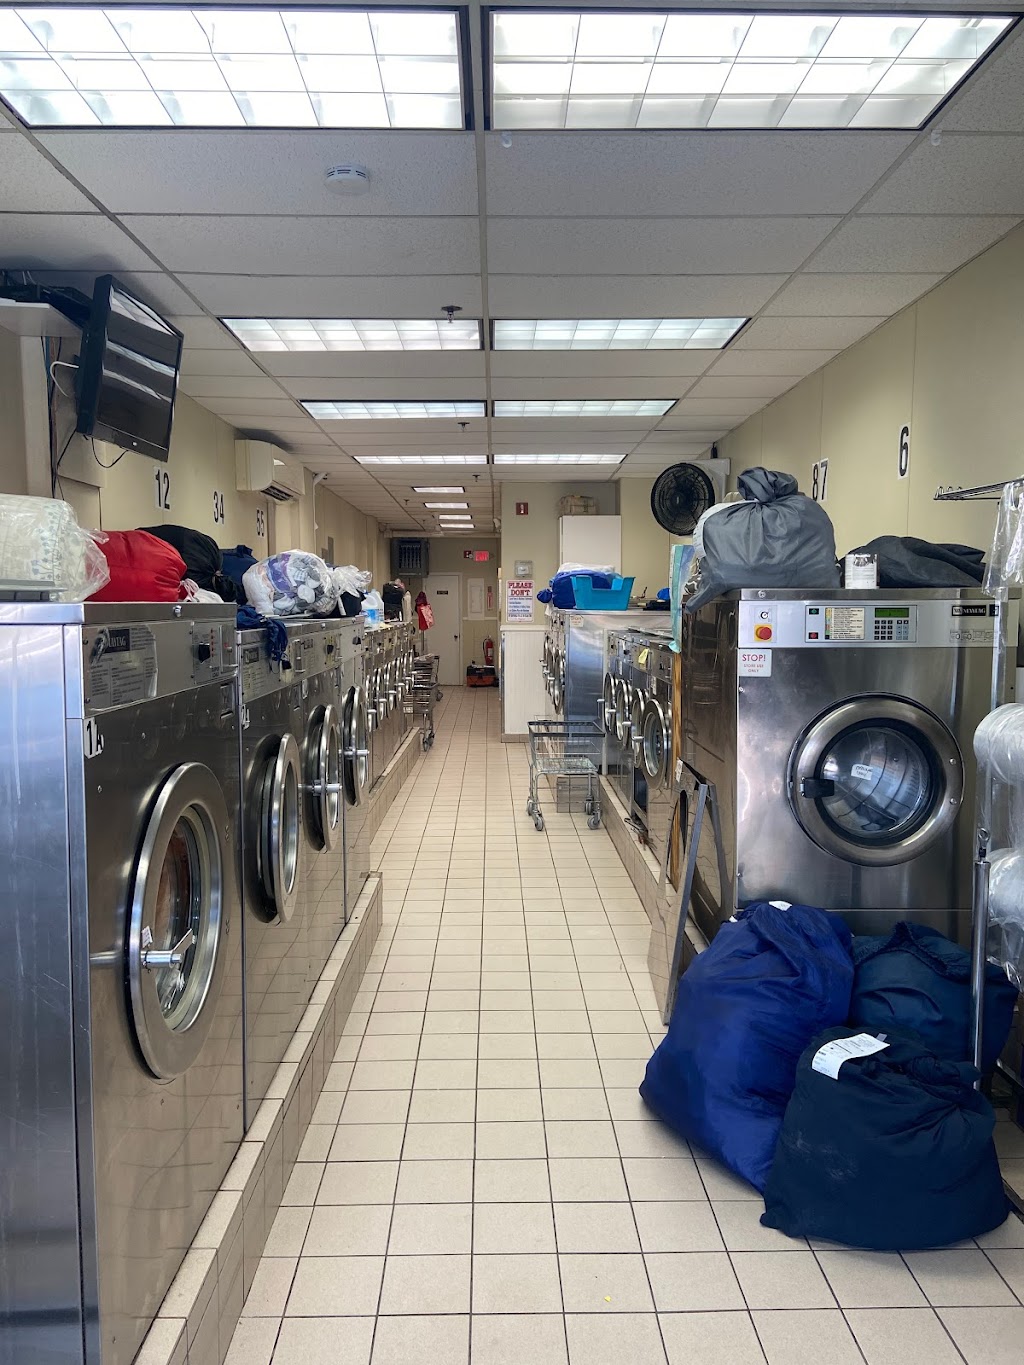 Fleetwood Laundry & Dry Cleaners | 850 Bronx River Rd # 14, Bronxville, NY 10708 | Phone: (914) 776-6535